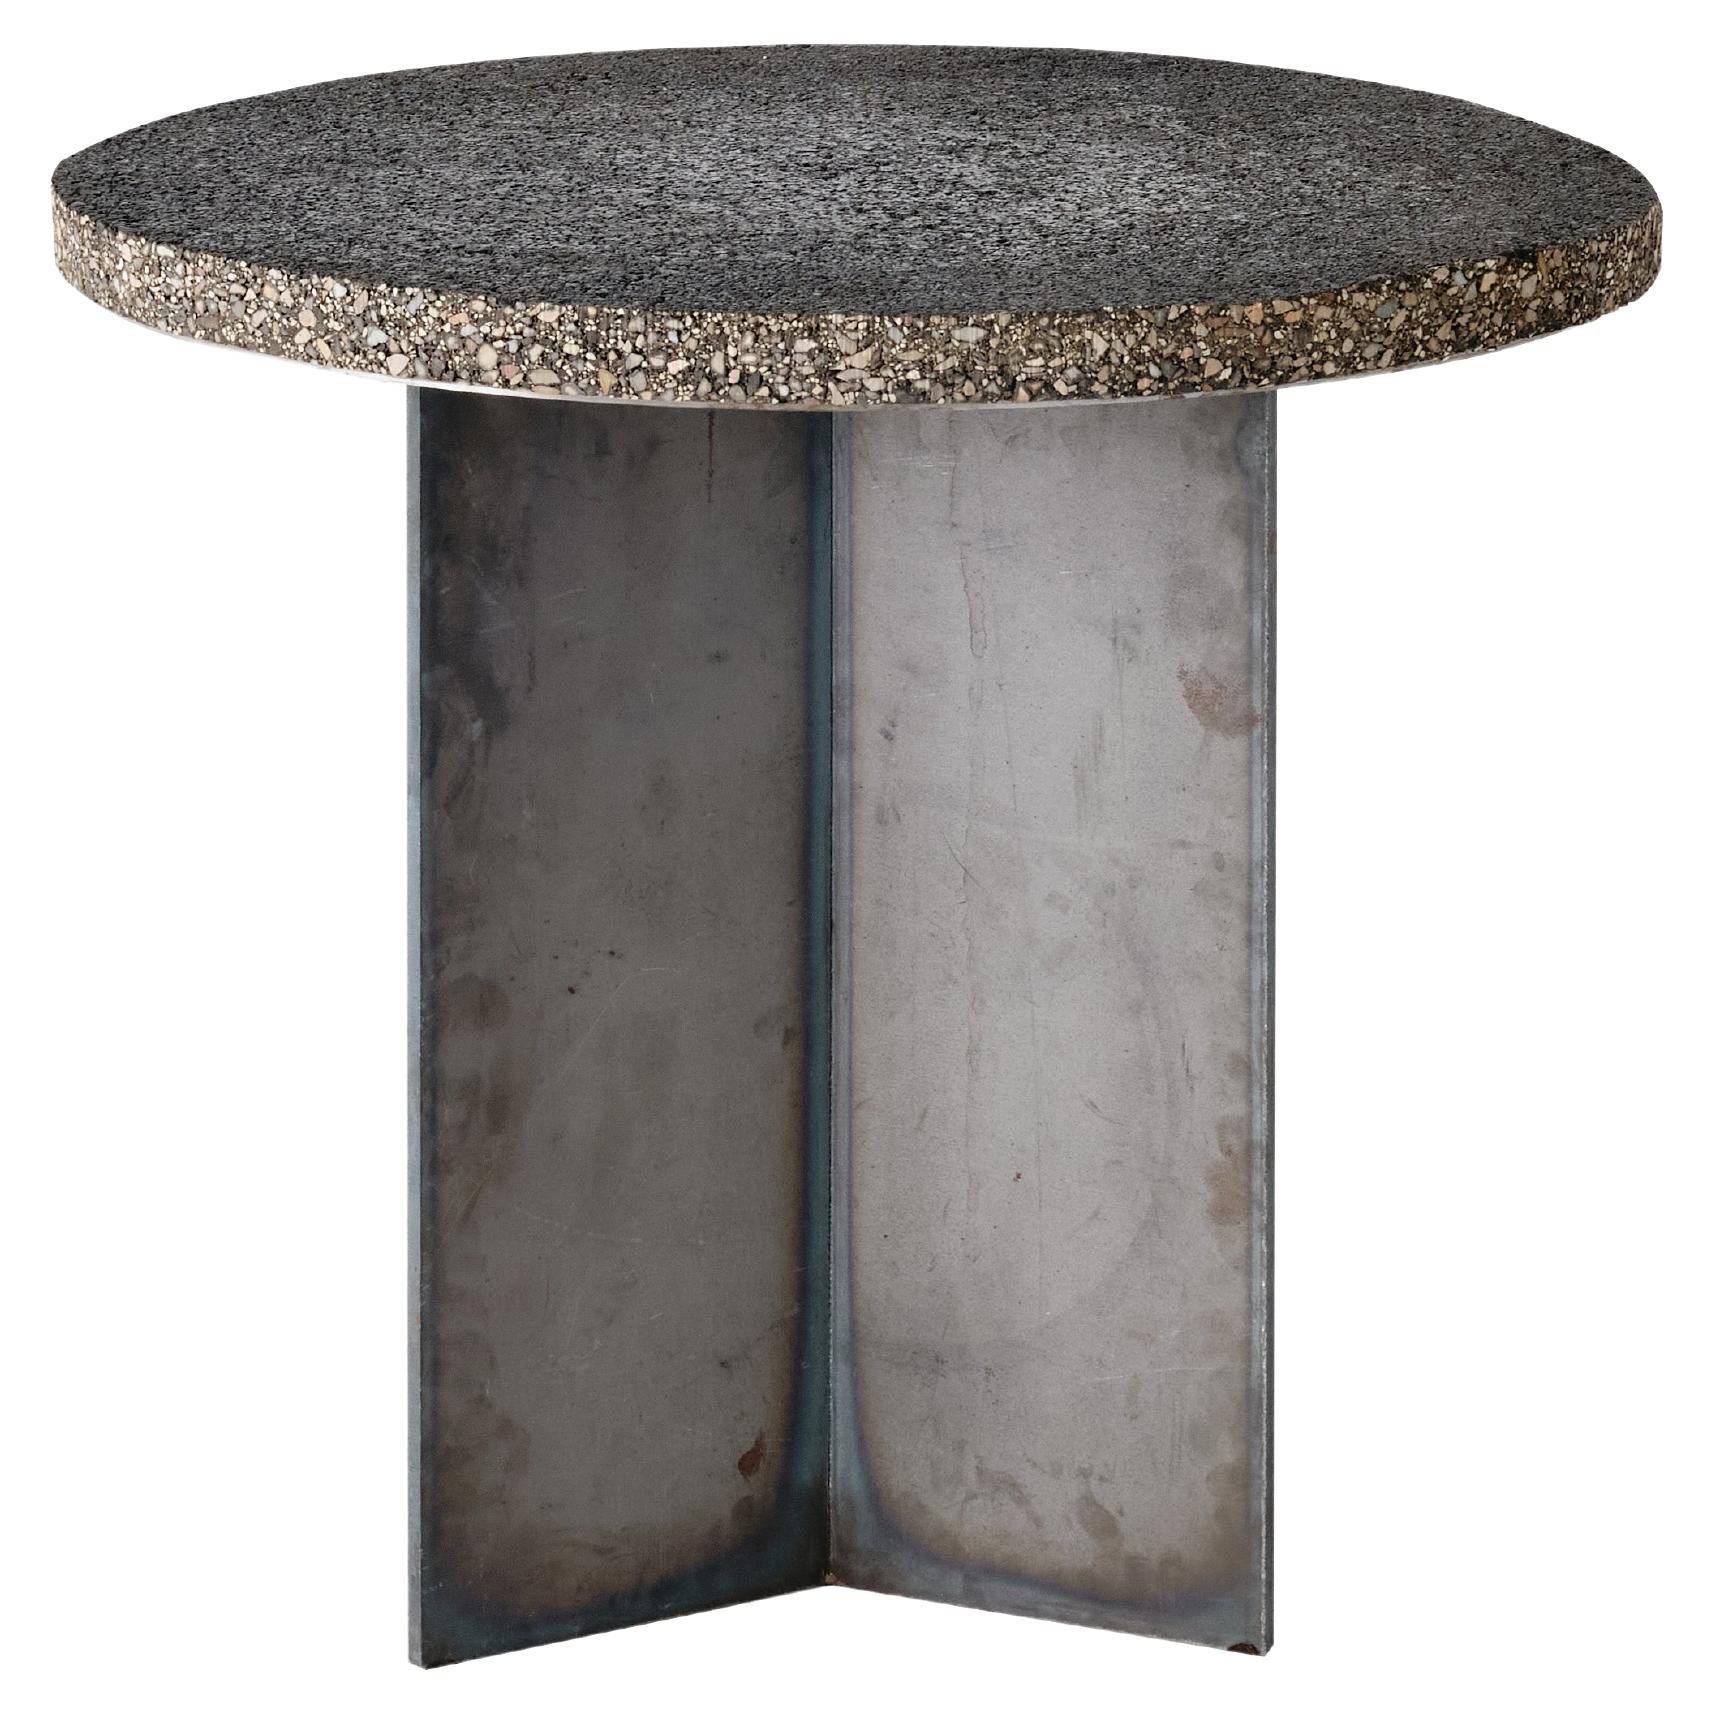 Temporal Collection, Limited Edition, Tarmac Table by Lucas Muñoz Muñoz